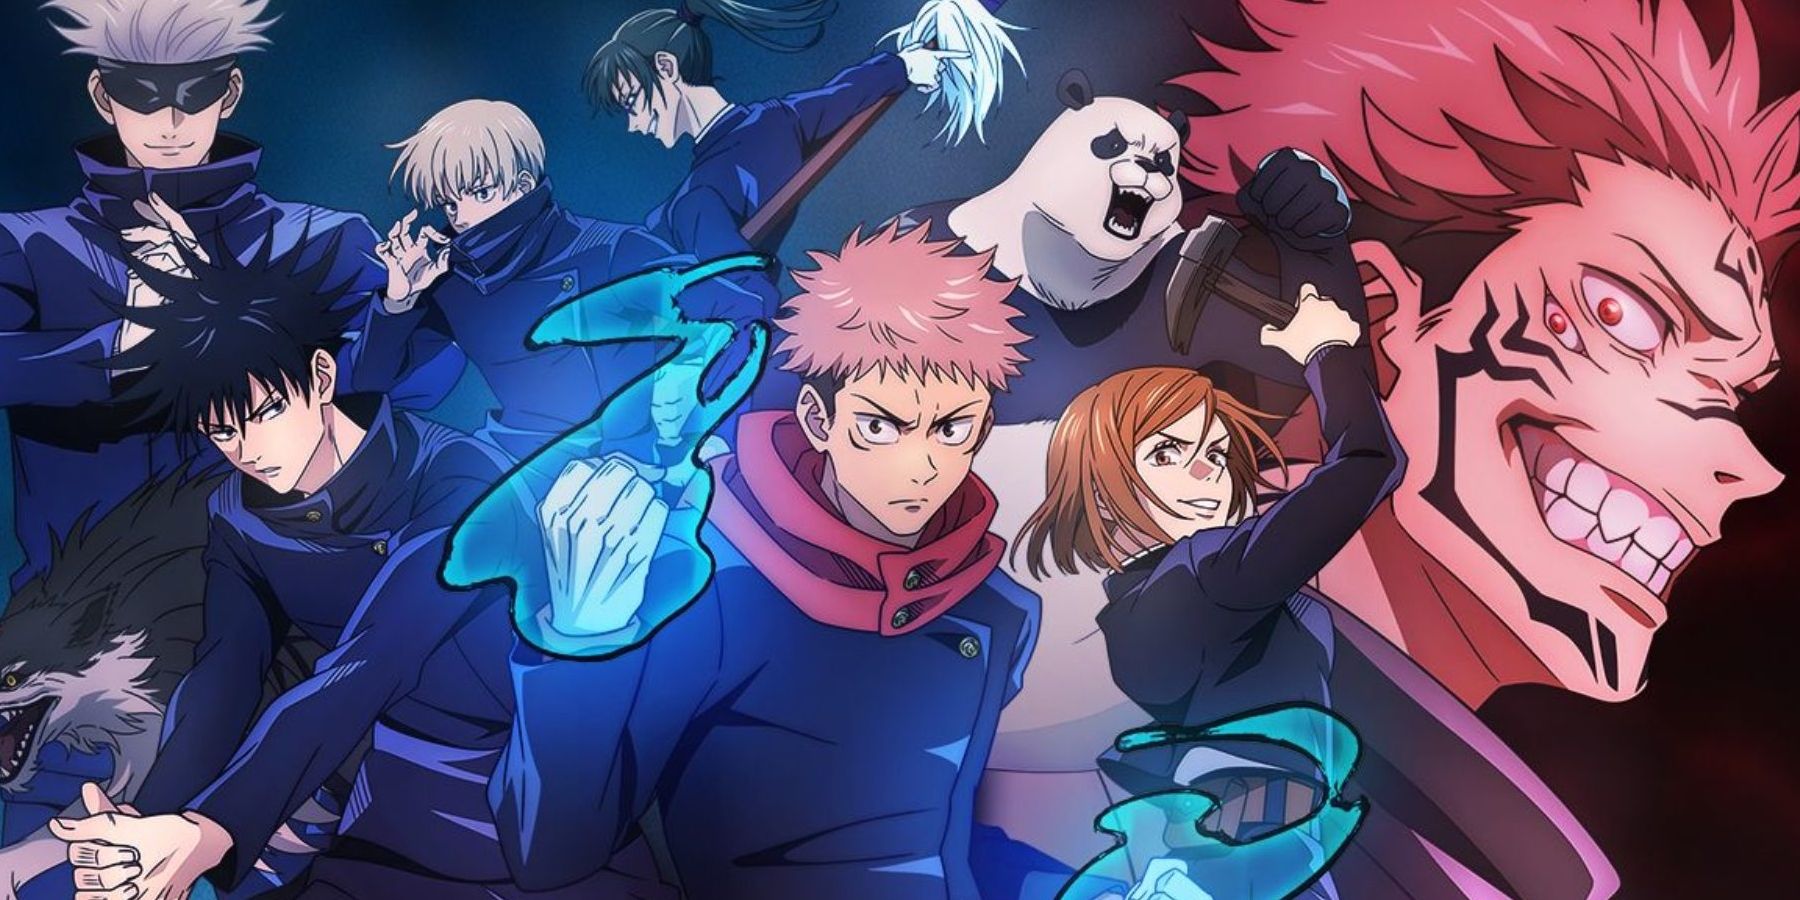 The characters in their ready for battle poses in the Jujutsu Kaisen Cursed Clash Cover Art